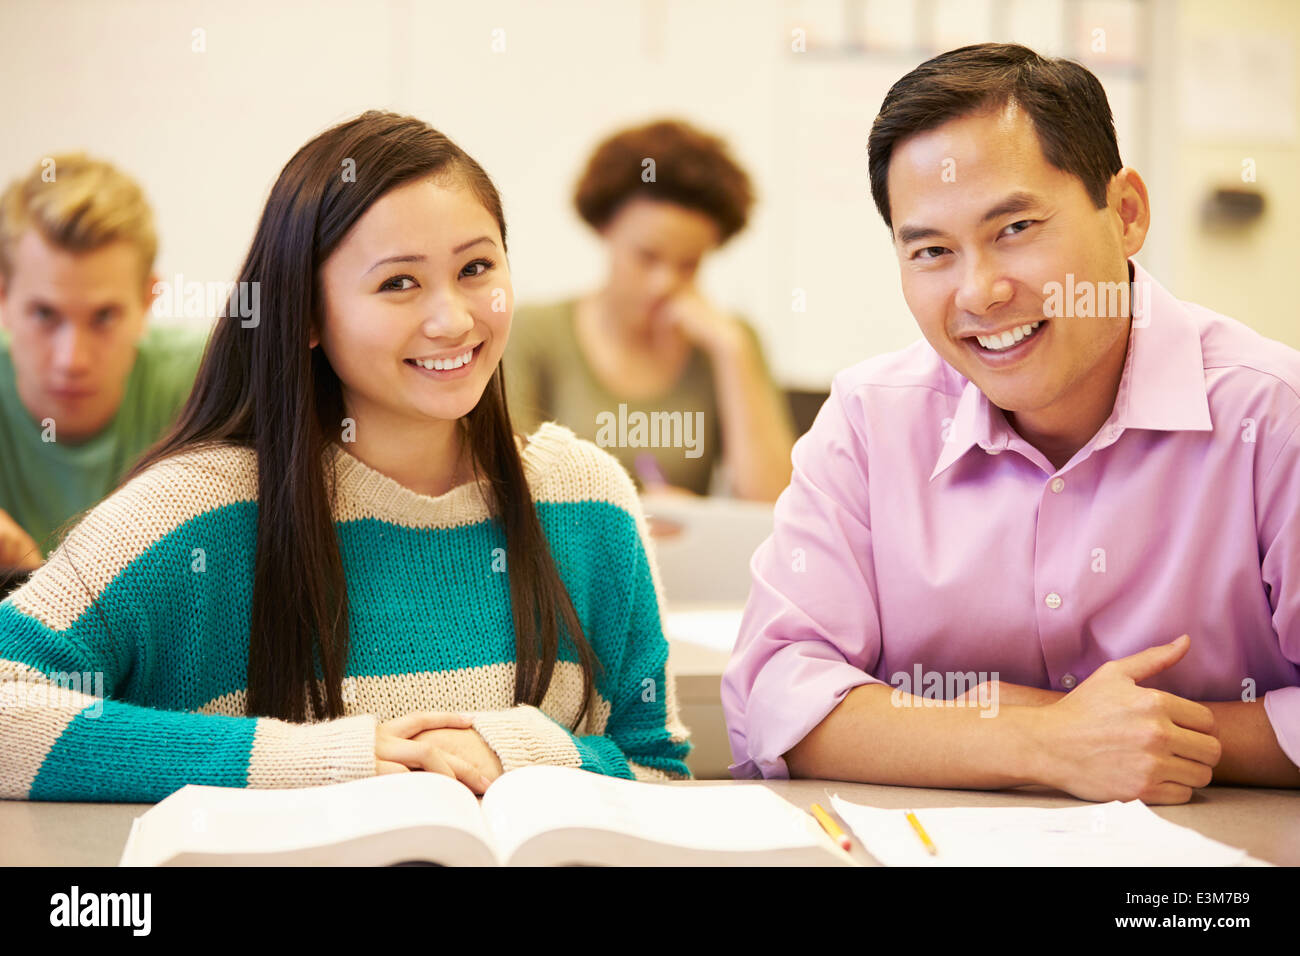 Female High School Student With Teacher Studying At Desk Stock Photo